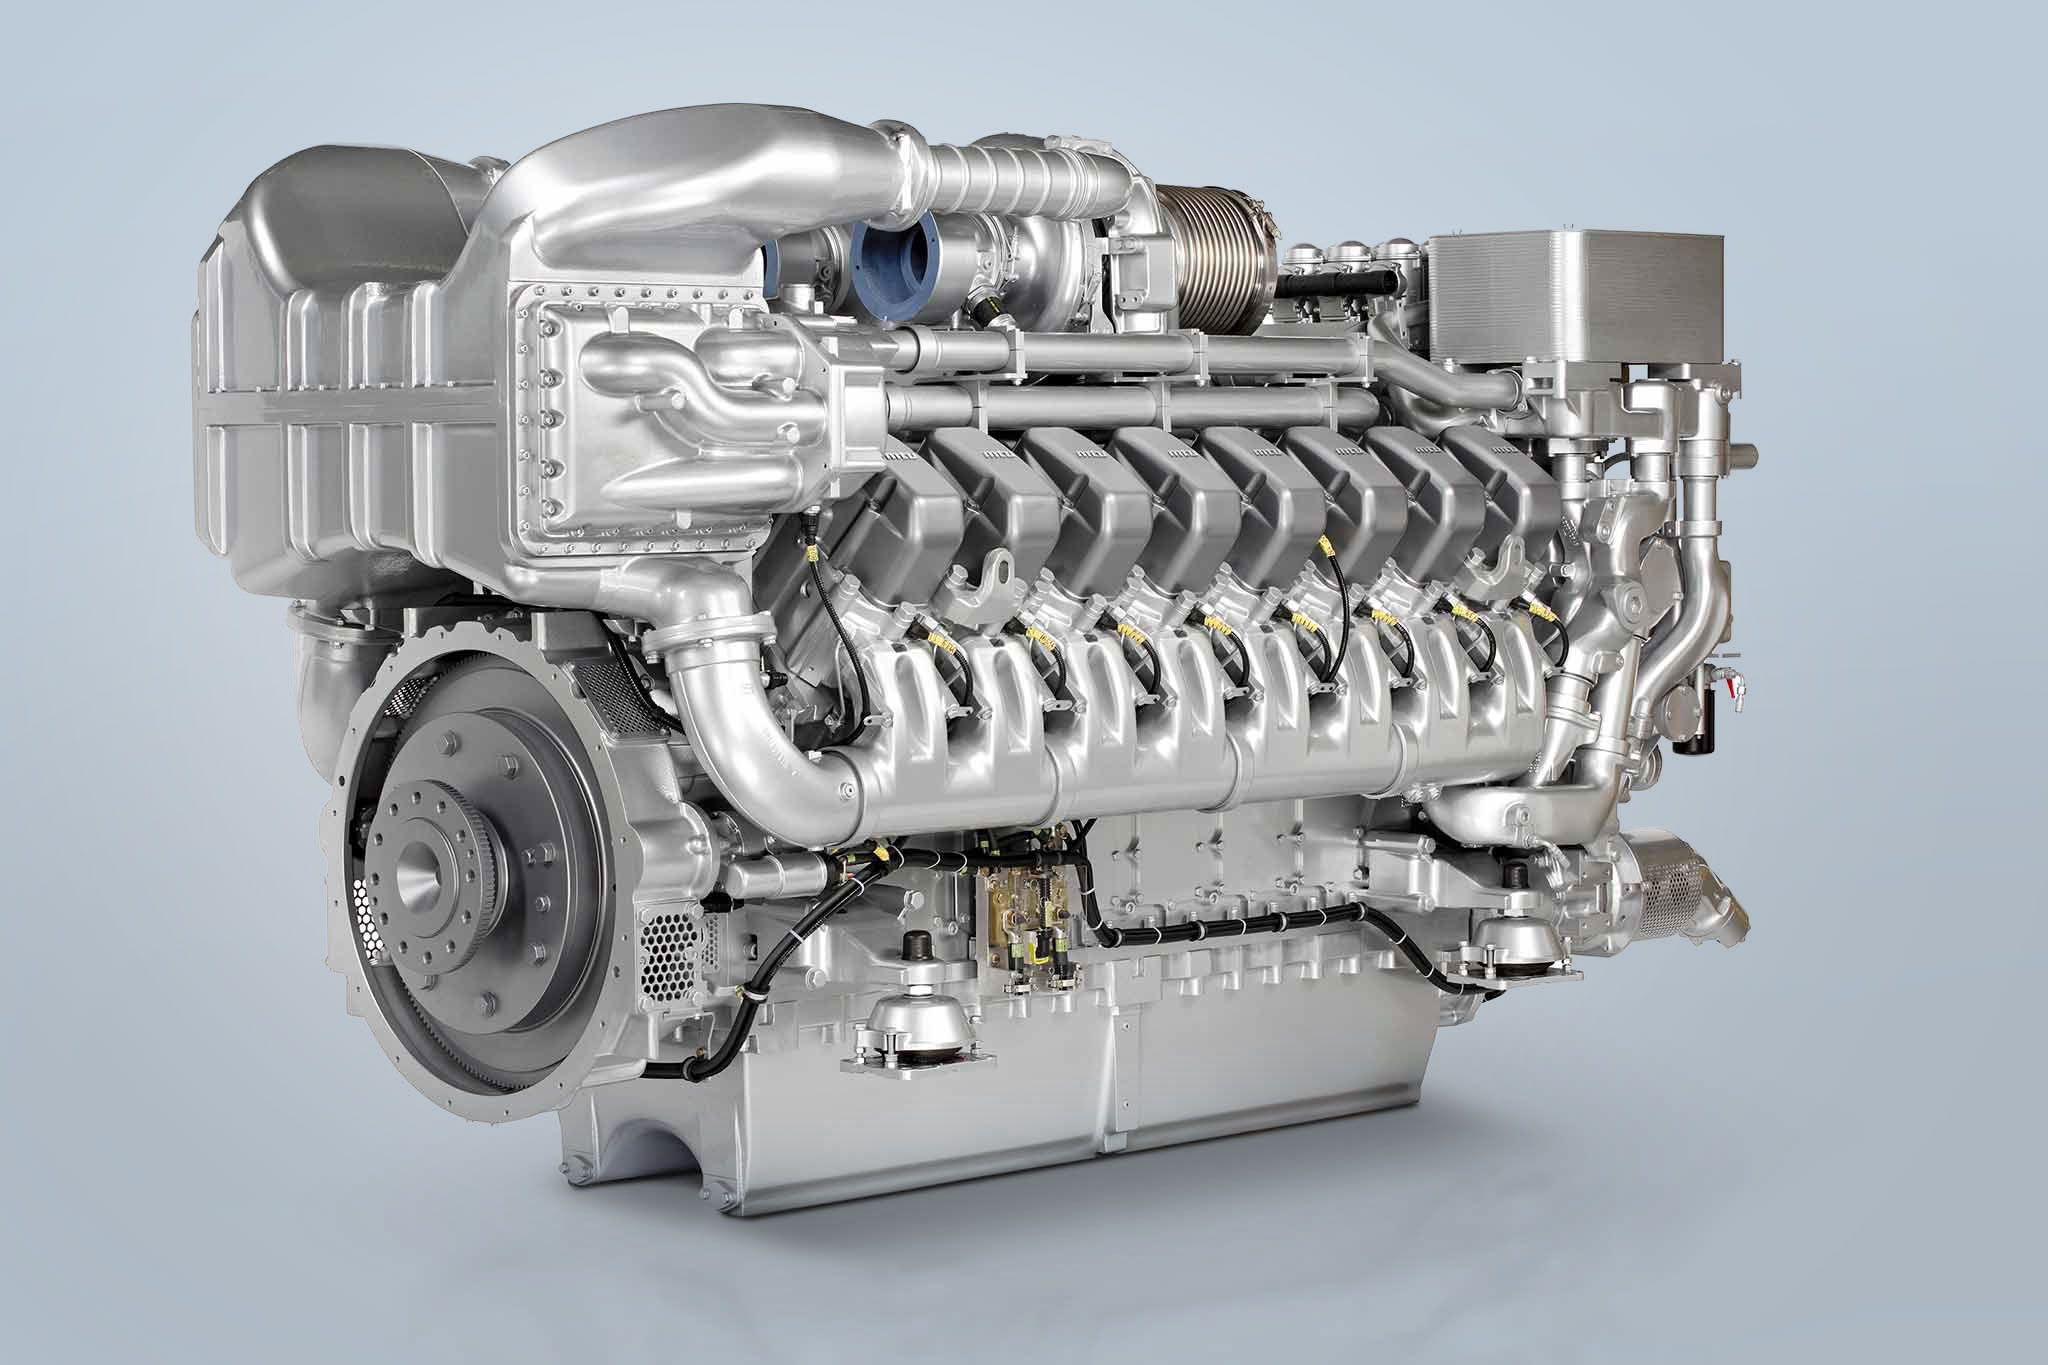 A large engine from MTU is shown against a white background.